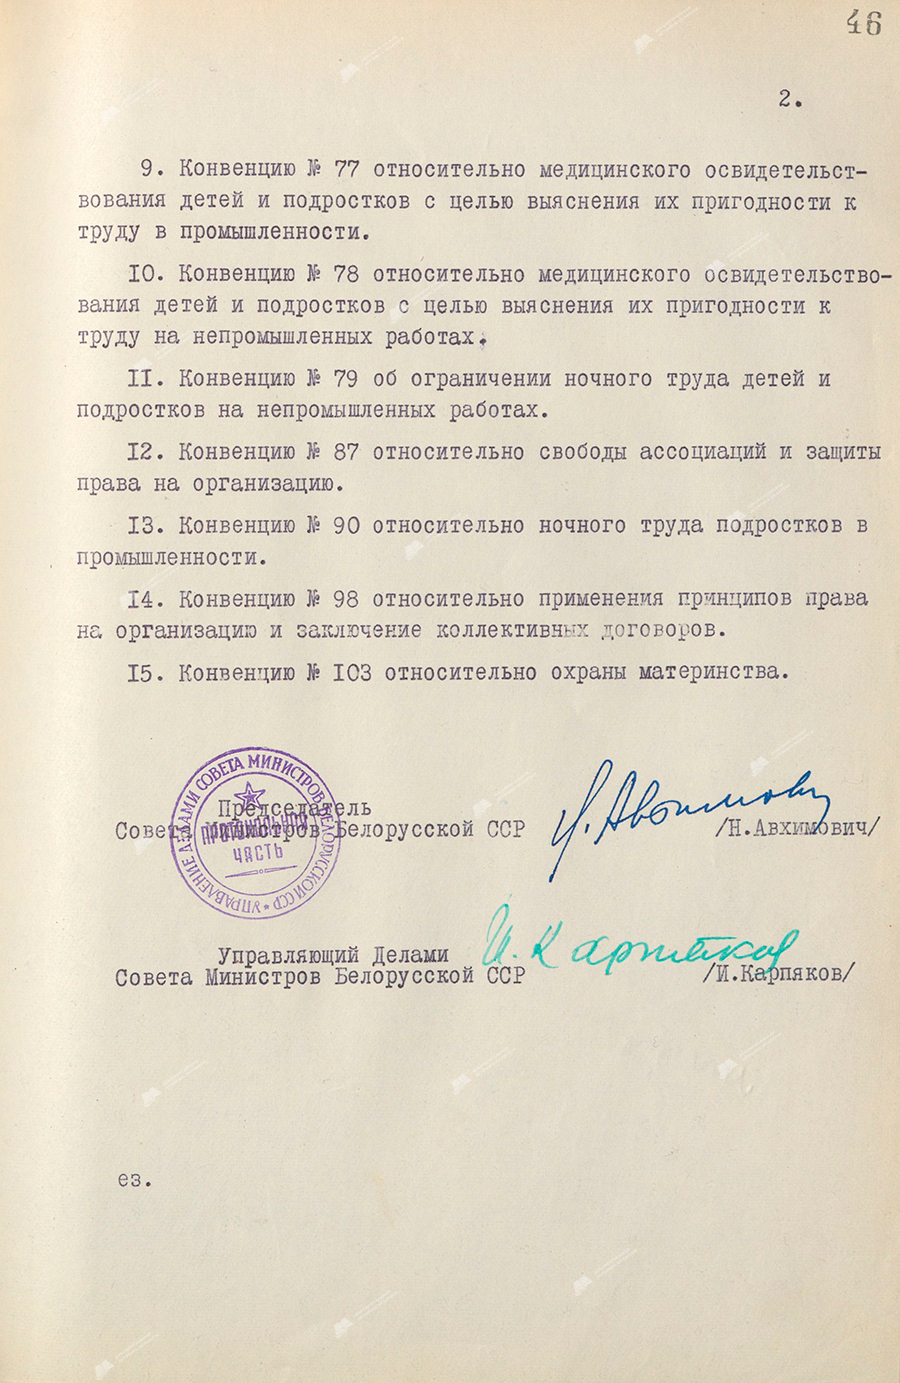 Resolution No. 433 of the Council of Ministers of the Byelorussian SSR «On approval of the conventions of the International Labor Organization (ILO)»-с. 1